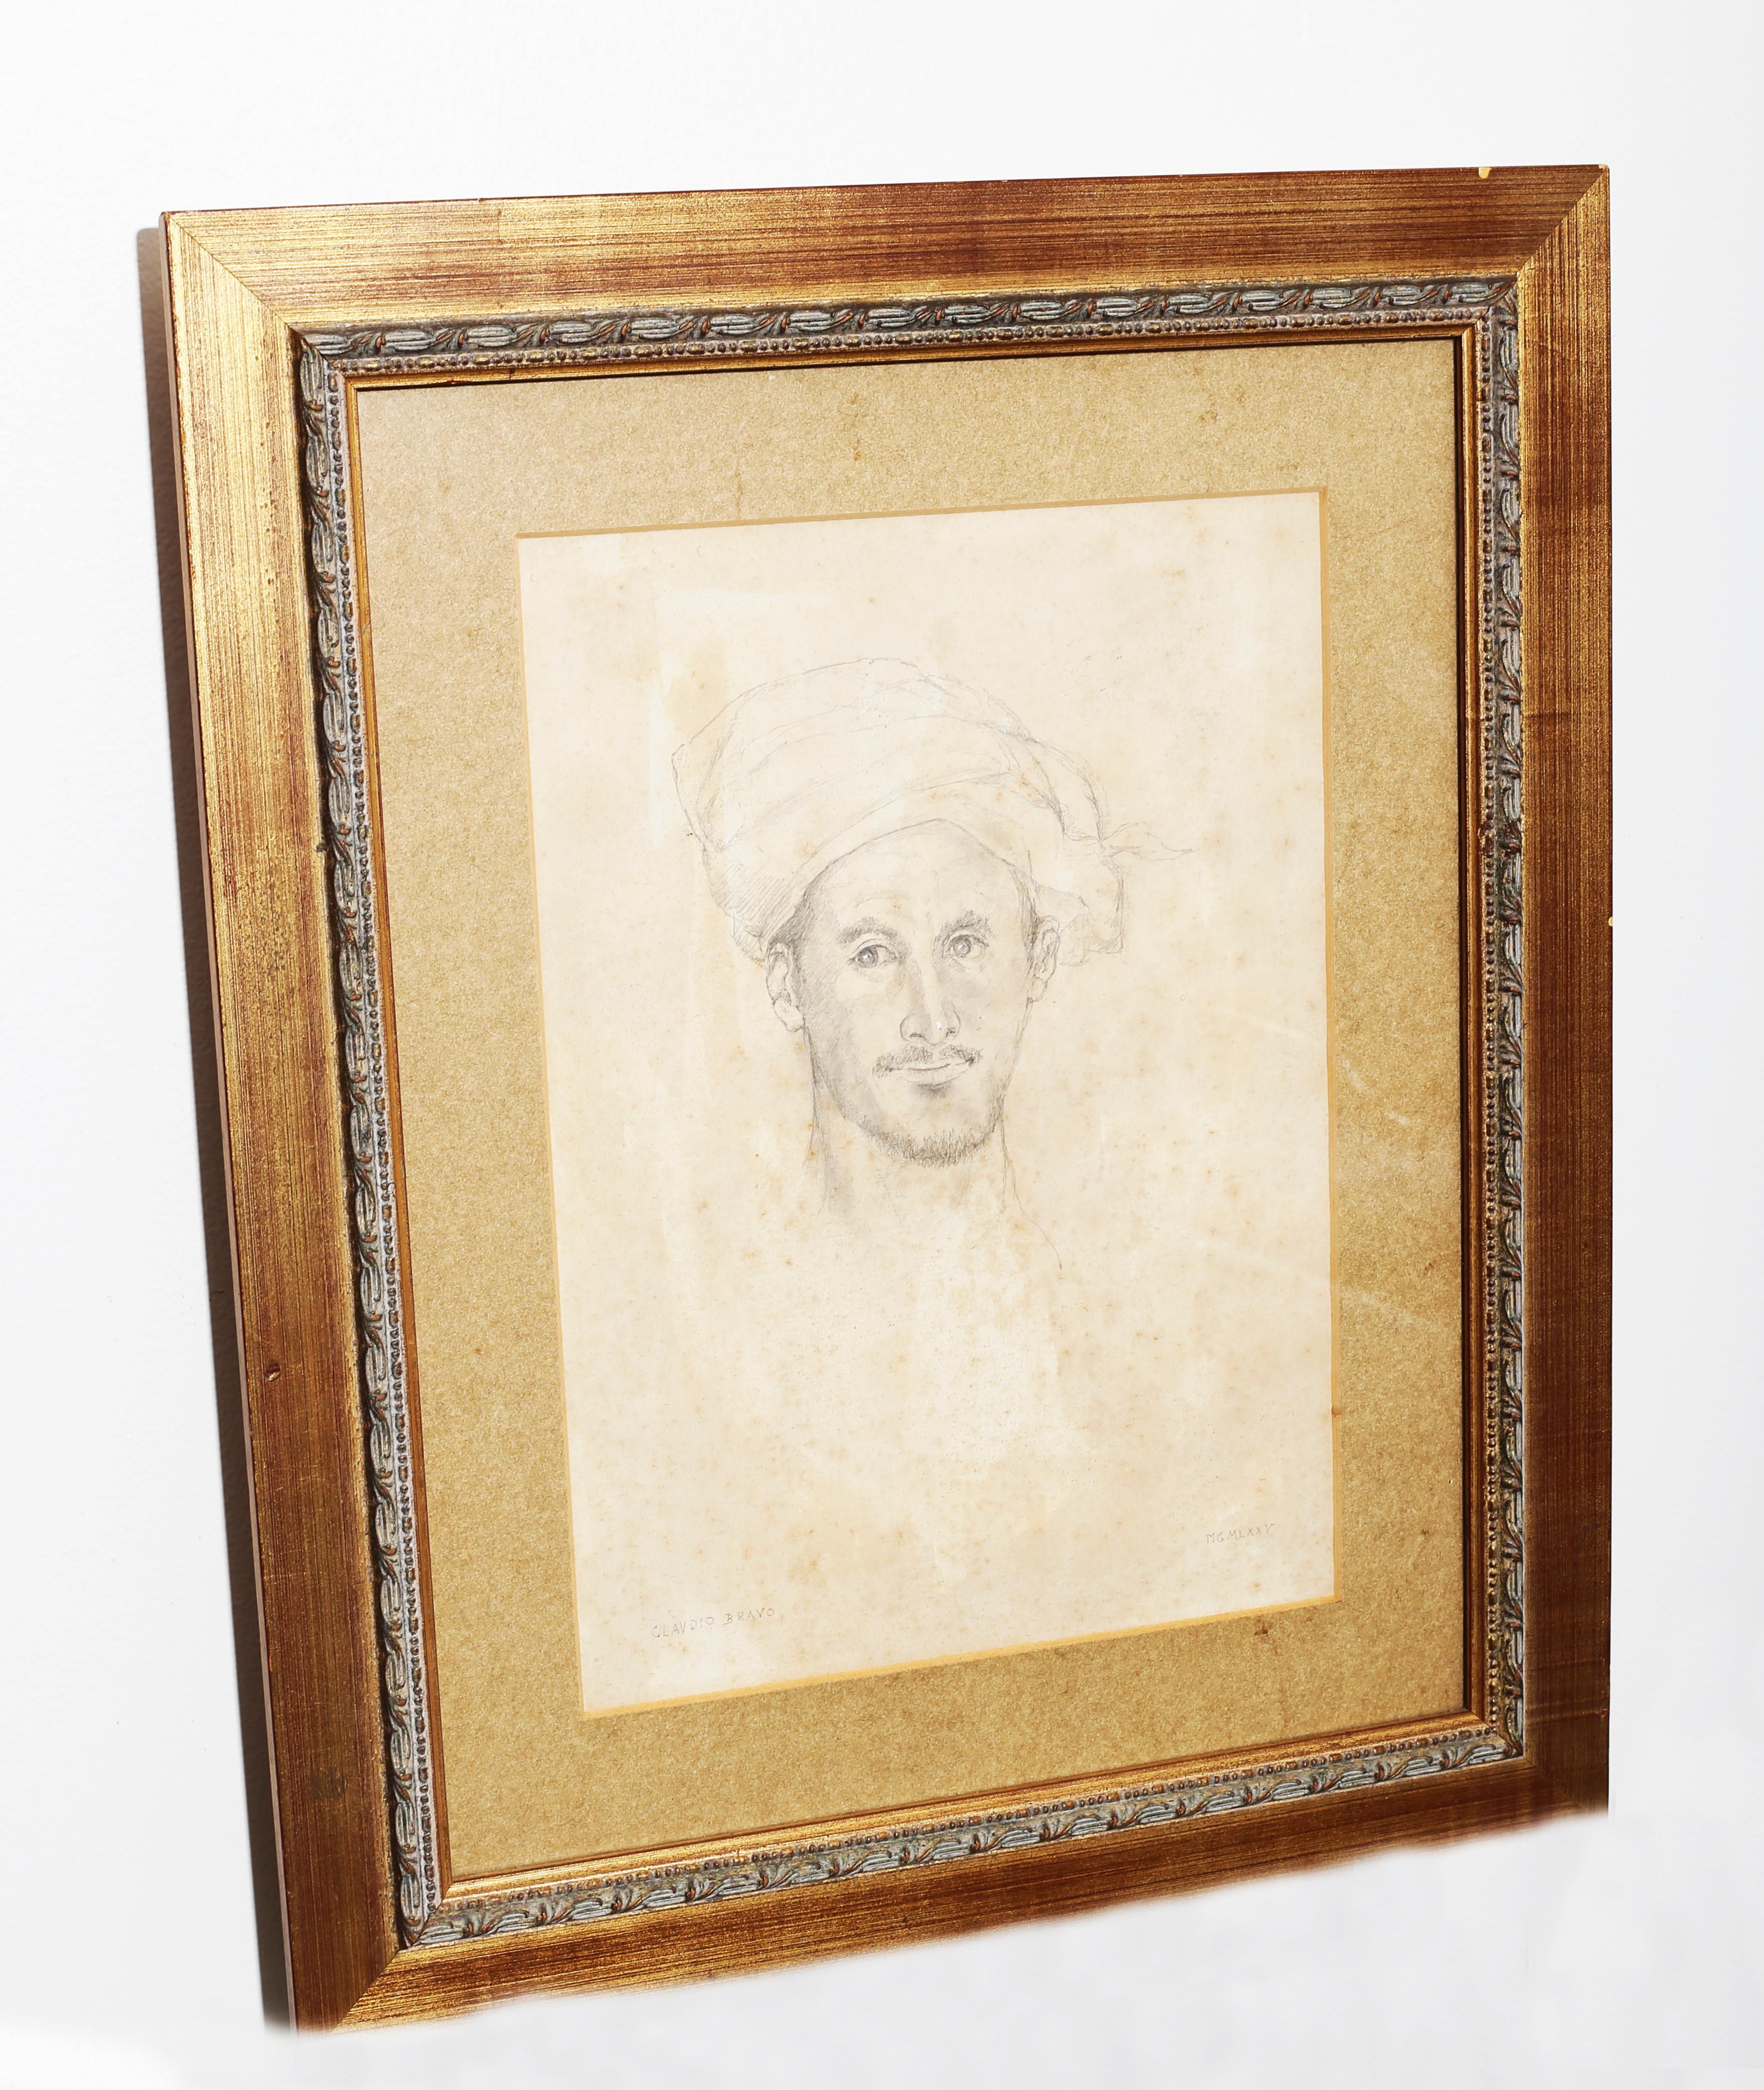 Claudio Bravo - Young man, Morocco, toga gown elegant male portrait Latin American hyperrealist
Original drawing in conté pencil, heightened with white on oatmeal coloured vergé paper by Claudio Bravo. 
The work was created during the artist's